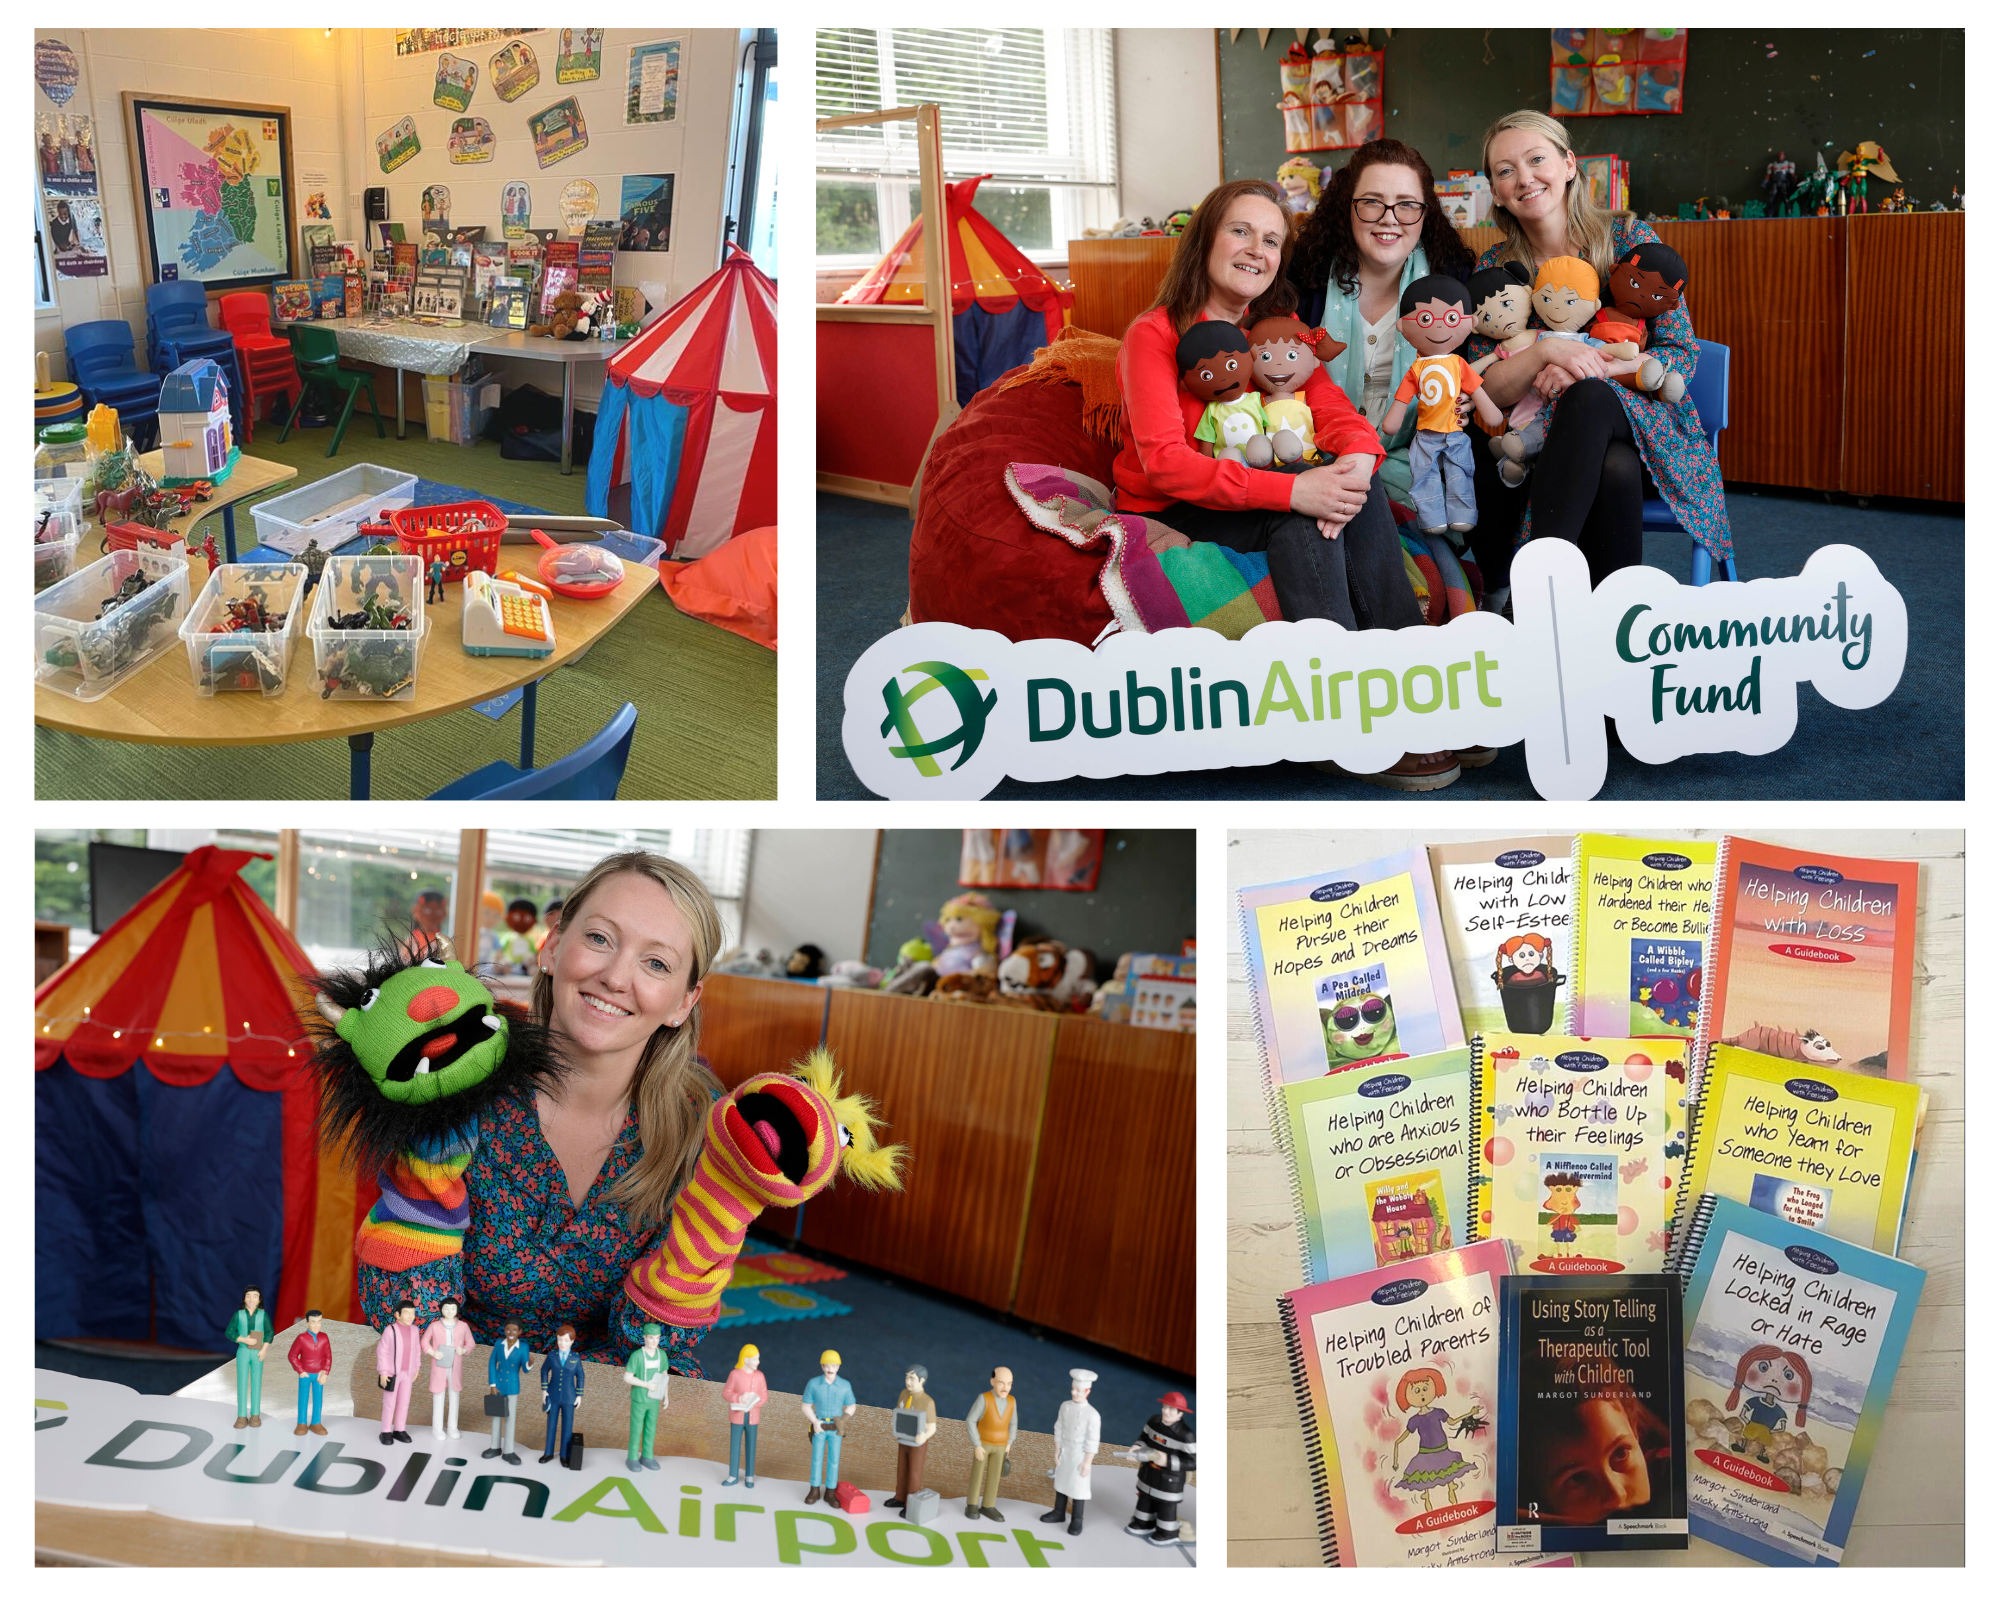 Photos of the 'Play Therapy' project in Ballymun